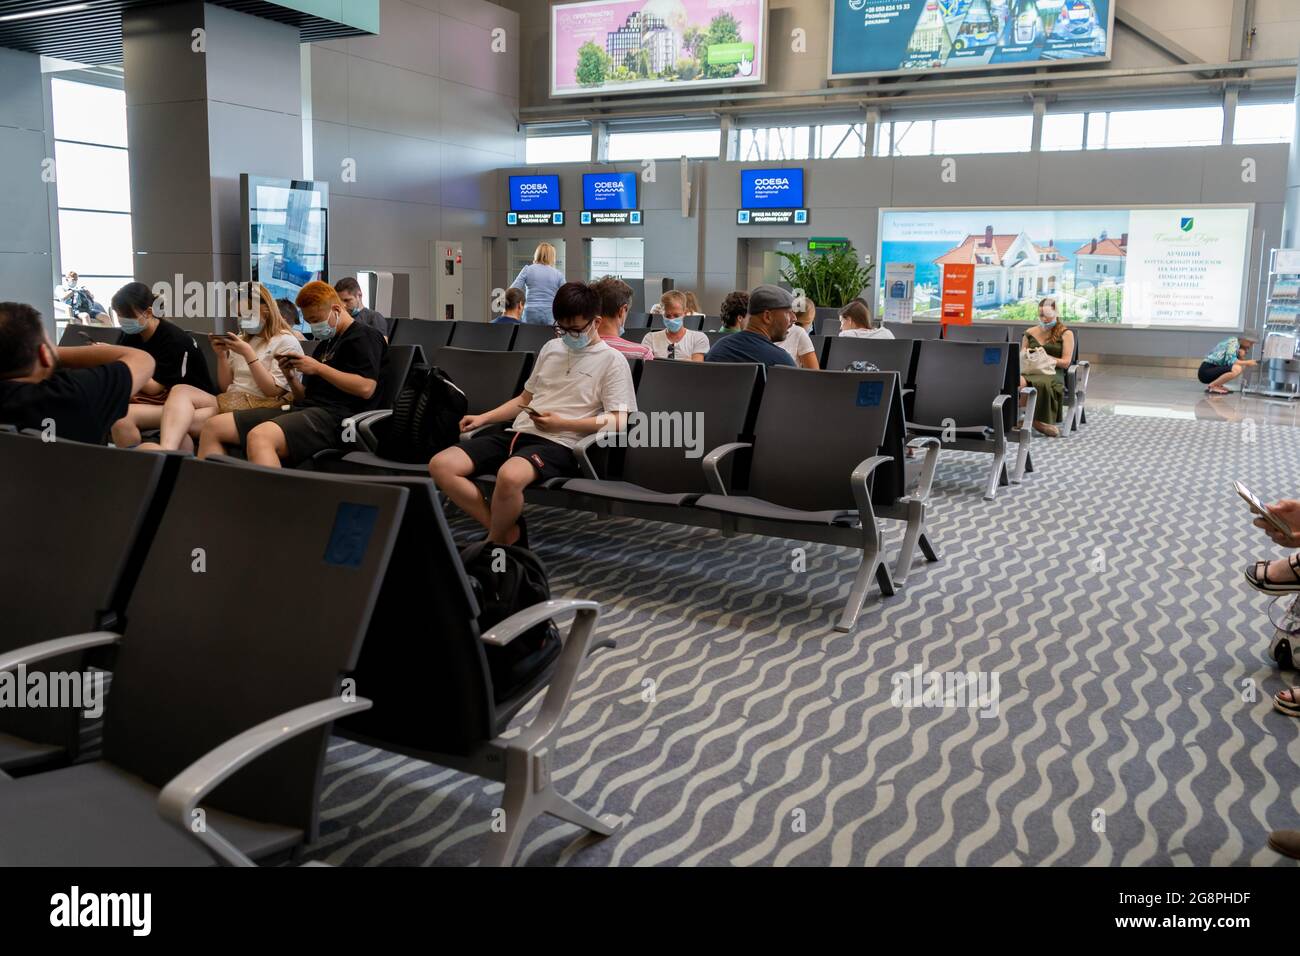 Ukraine, Odessa - July 16, 2021: Odessa airport. Inside the terminal before the flight. Odesa ODS Airport. Masked people are waiting to board the plane. Travelers at the airport in the waiting room. Stock Photo